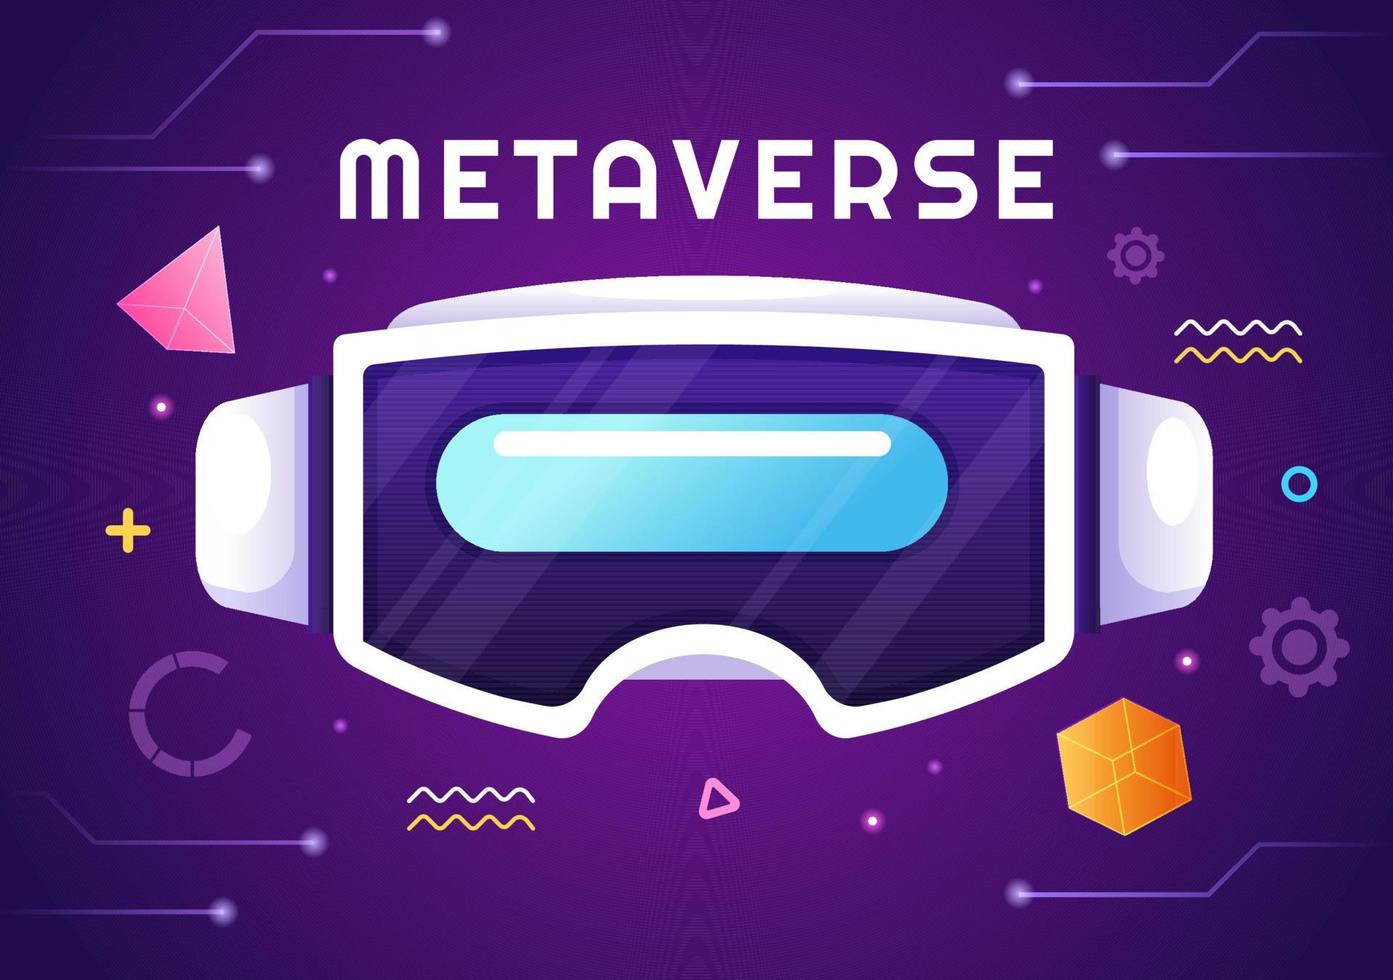 Metaverse Digital Virtual Reality Technology wears VR Glasses for Future Innovation and Communication in Hand Drawn Flat Cartoon Illustration vector